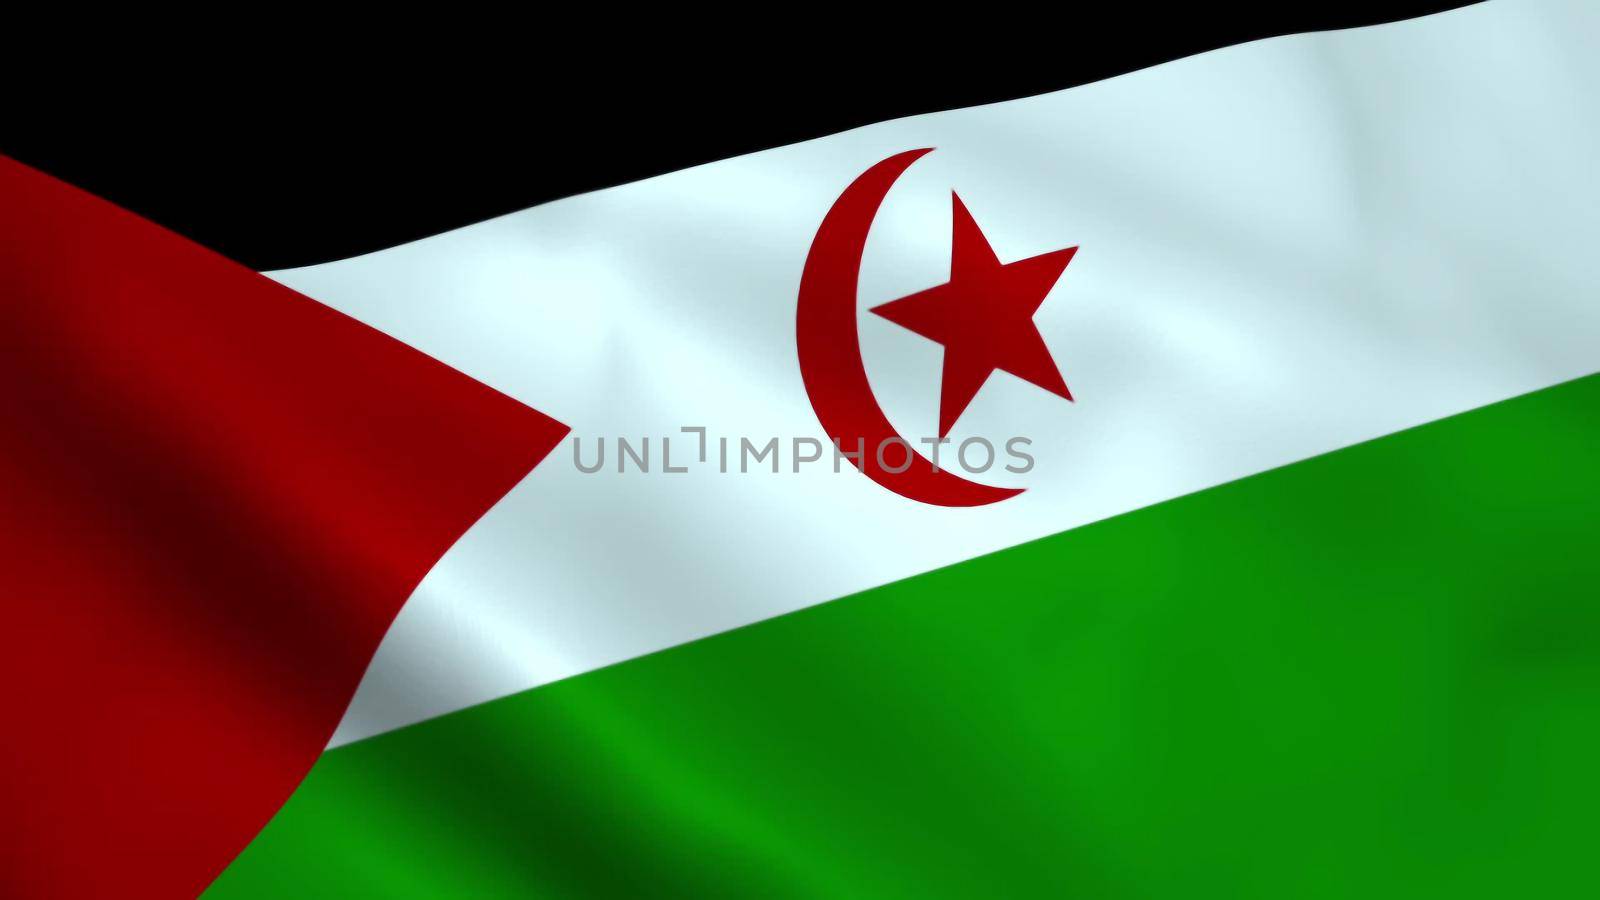 Realistic Western Sahara flag 3D rendering by designprojects